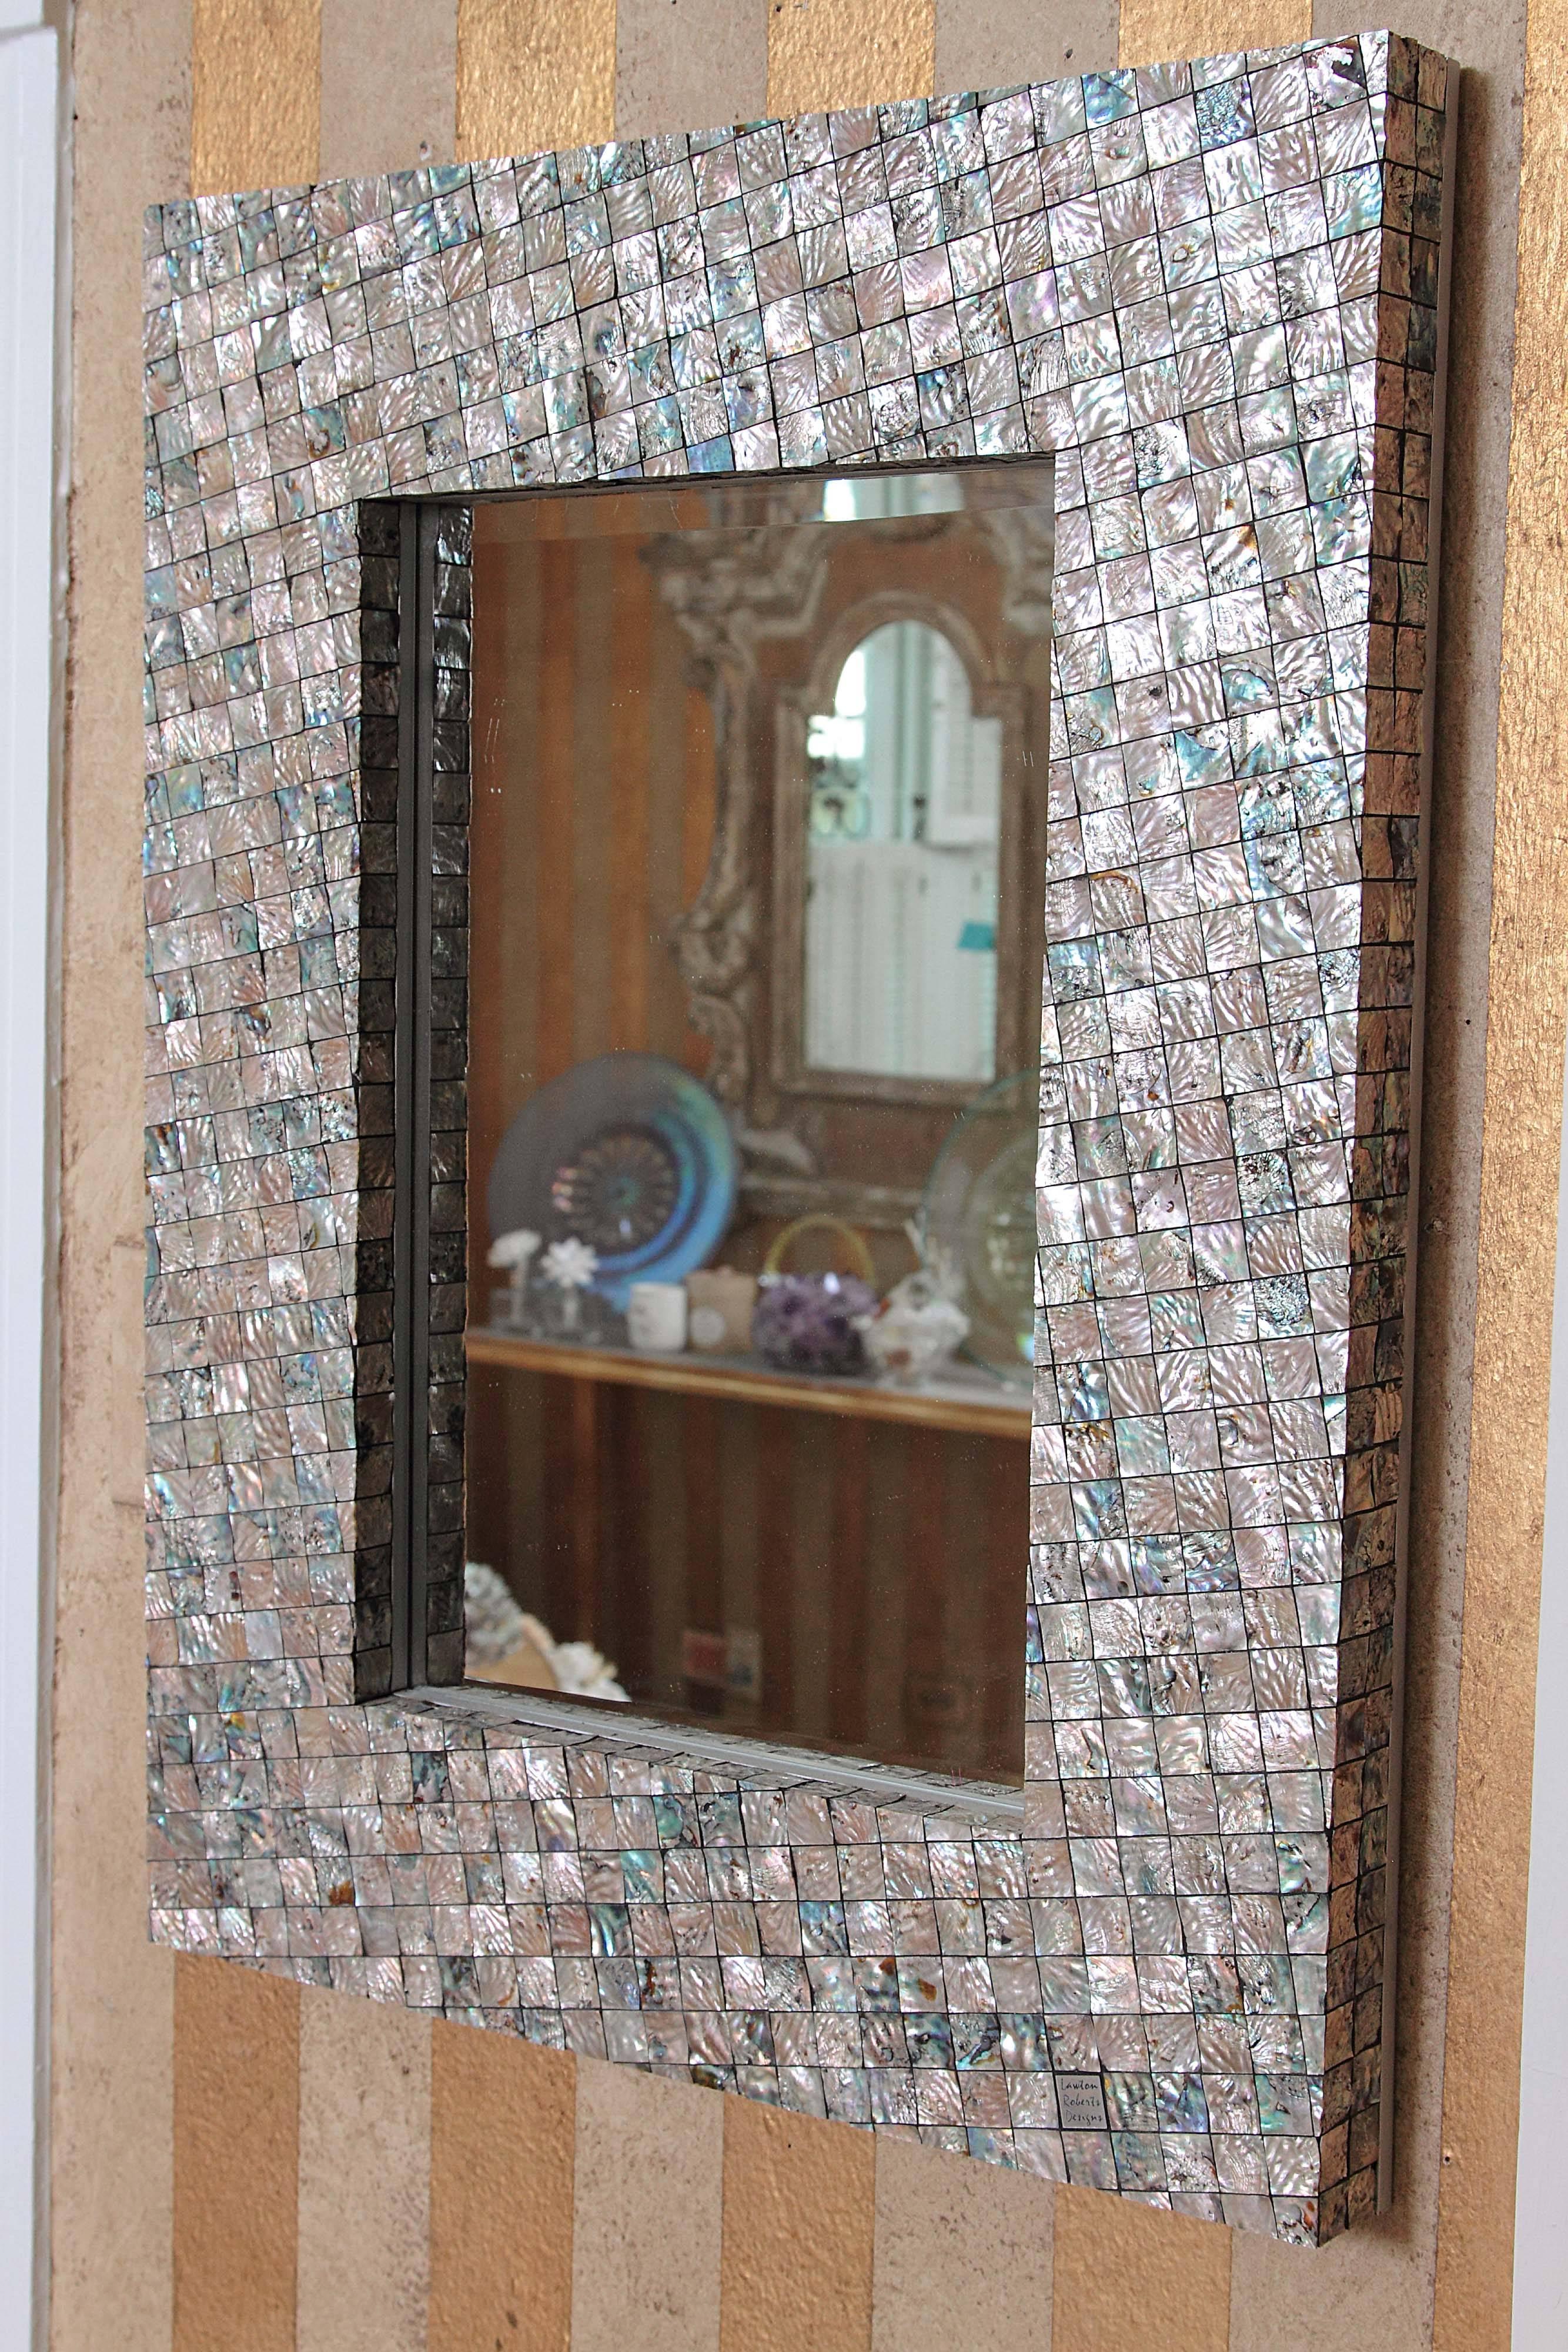 This is a handmade abalone shell mirror made by South African artist. Each shell is individually cut and placed to create this mosaic style.